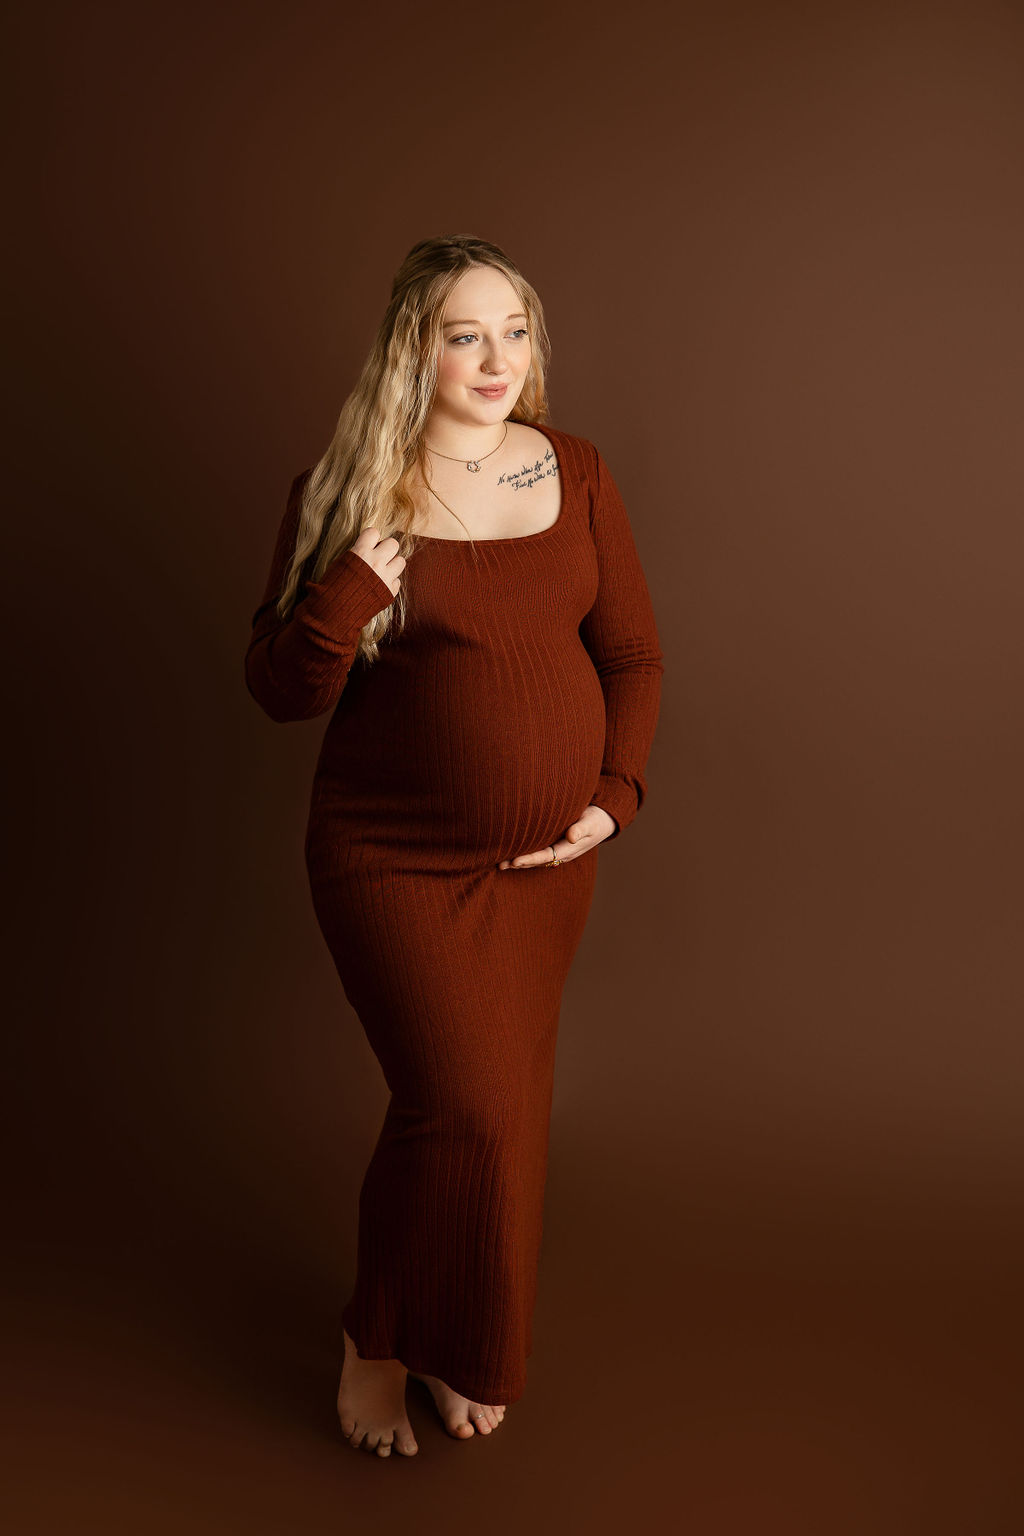 A mom to be stands in a studio in a red maternity gown holding her bump and hair after meeting milwaukee midwife